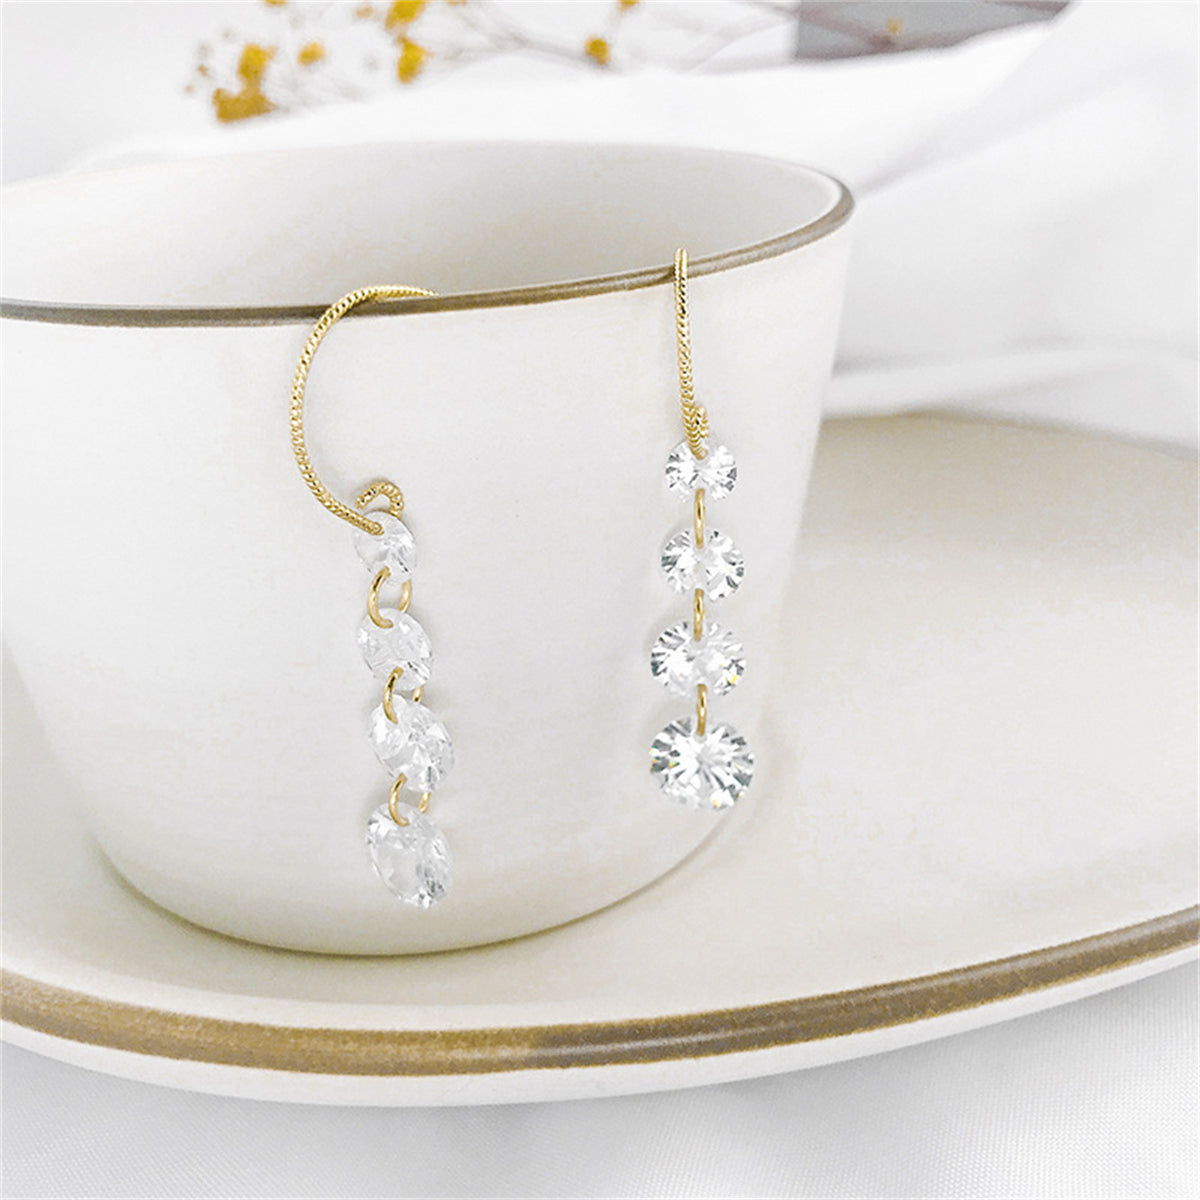 Cubic Zirconia & 18K Gold-Plated Linked Threader Earrings